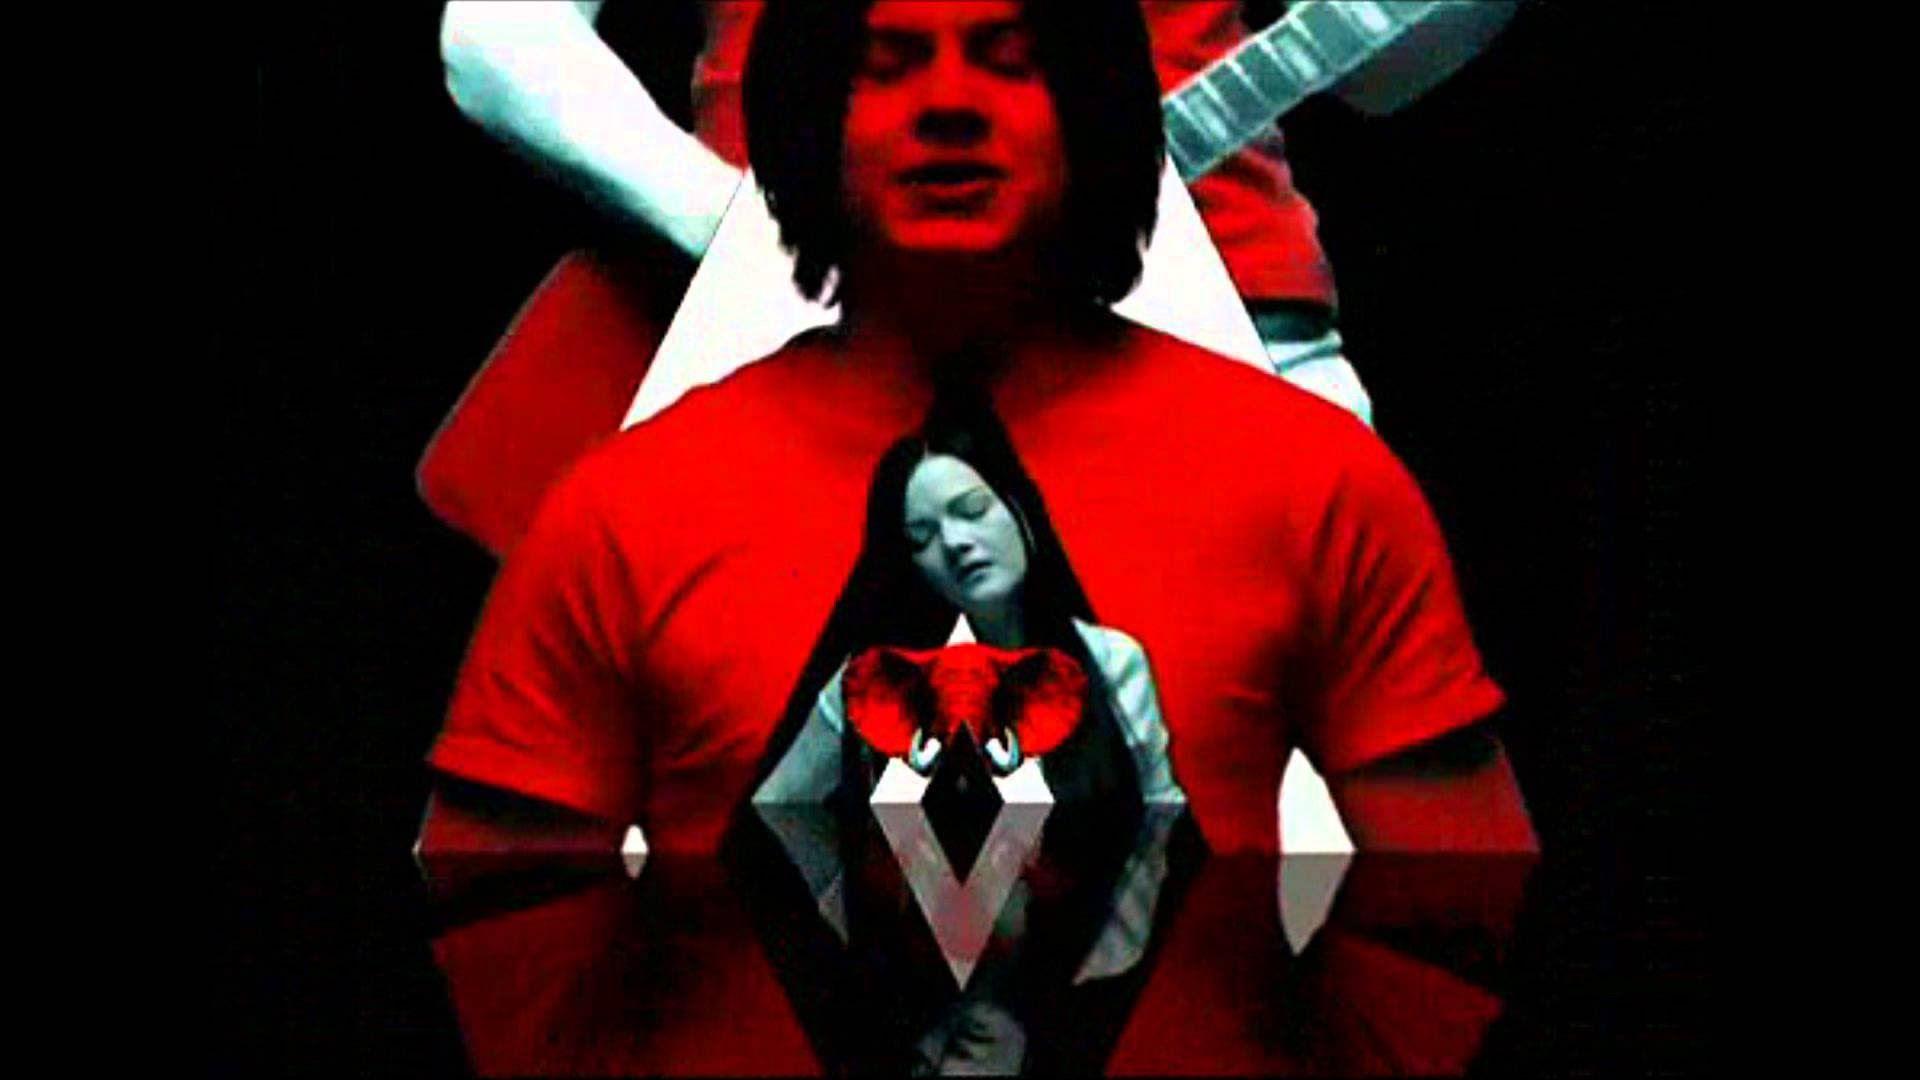 The White Stripes Nation Army Acoustic Cover Using FL